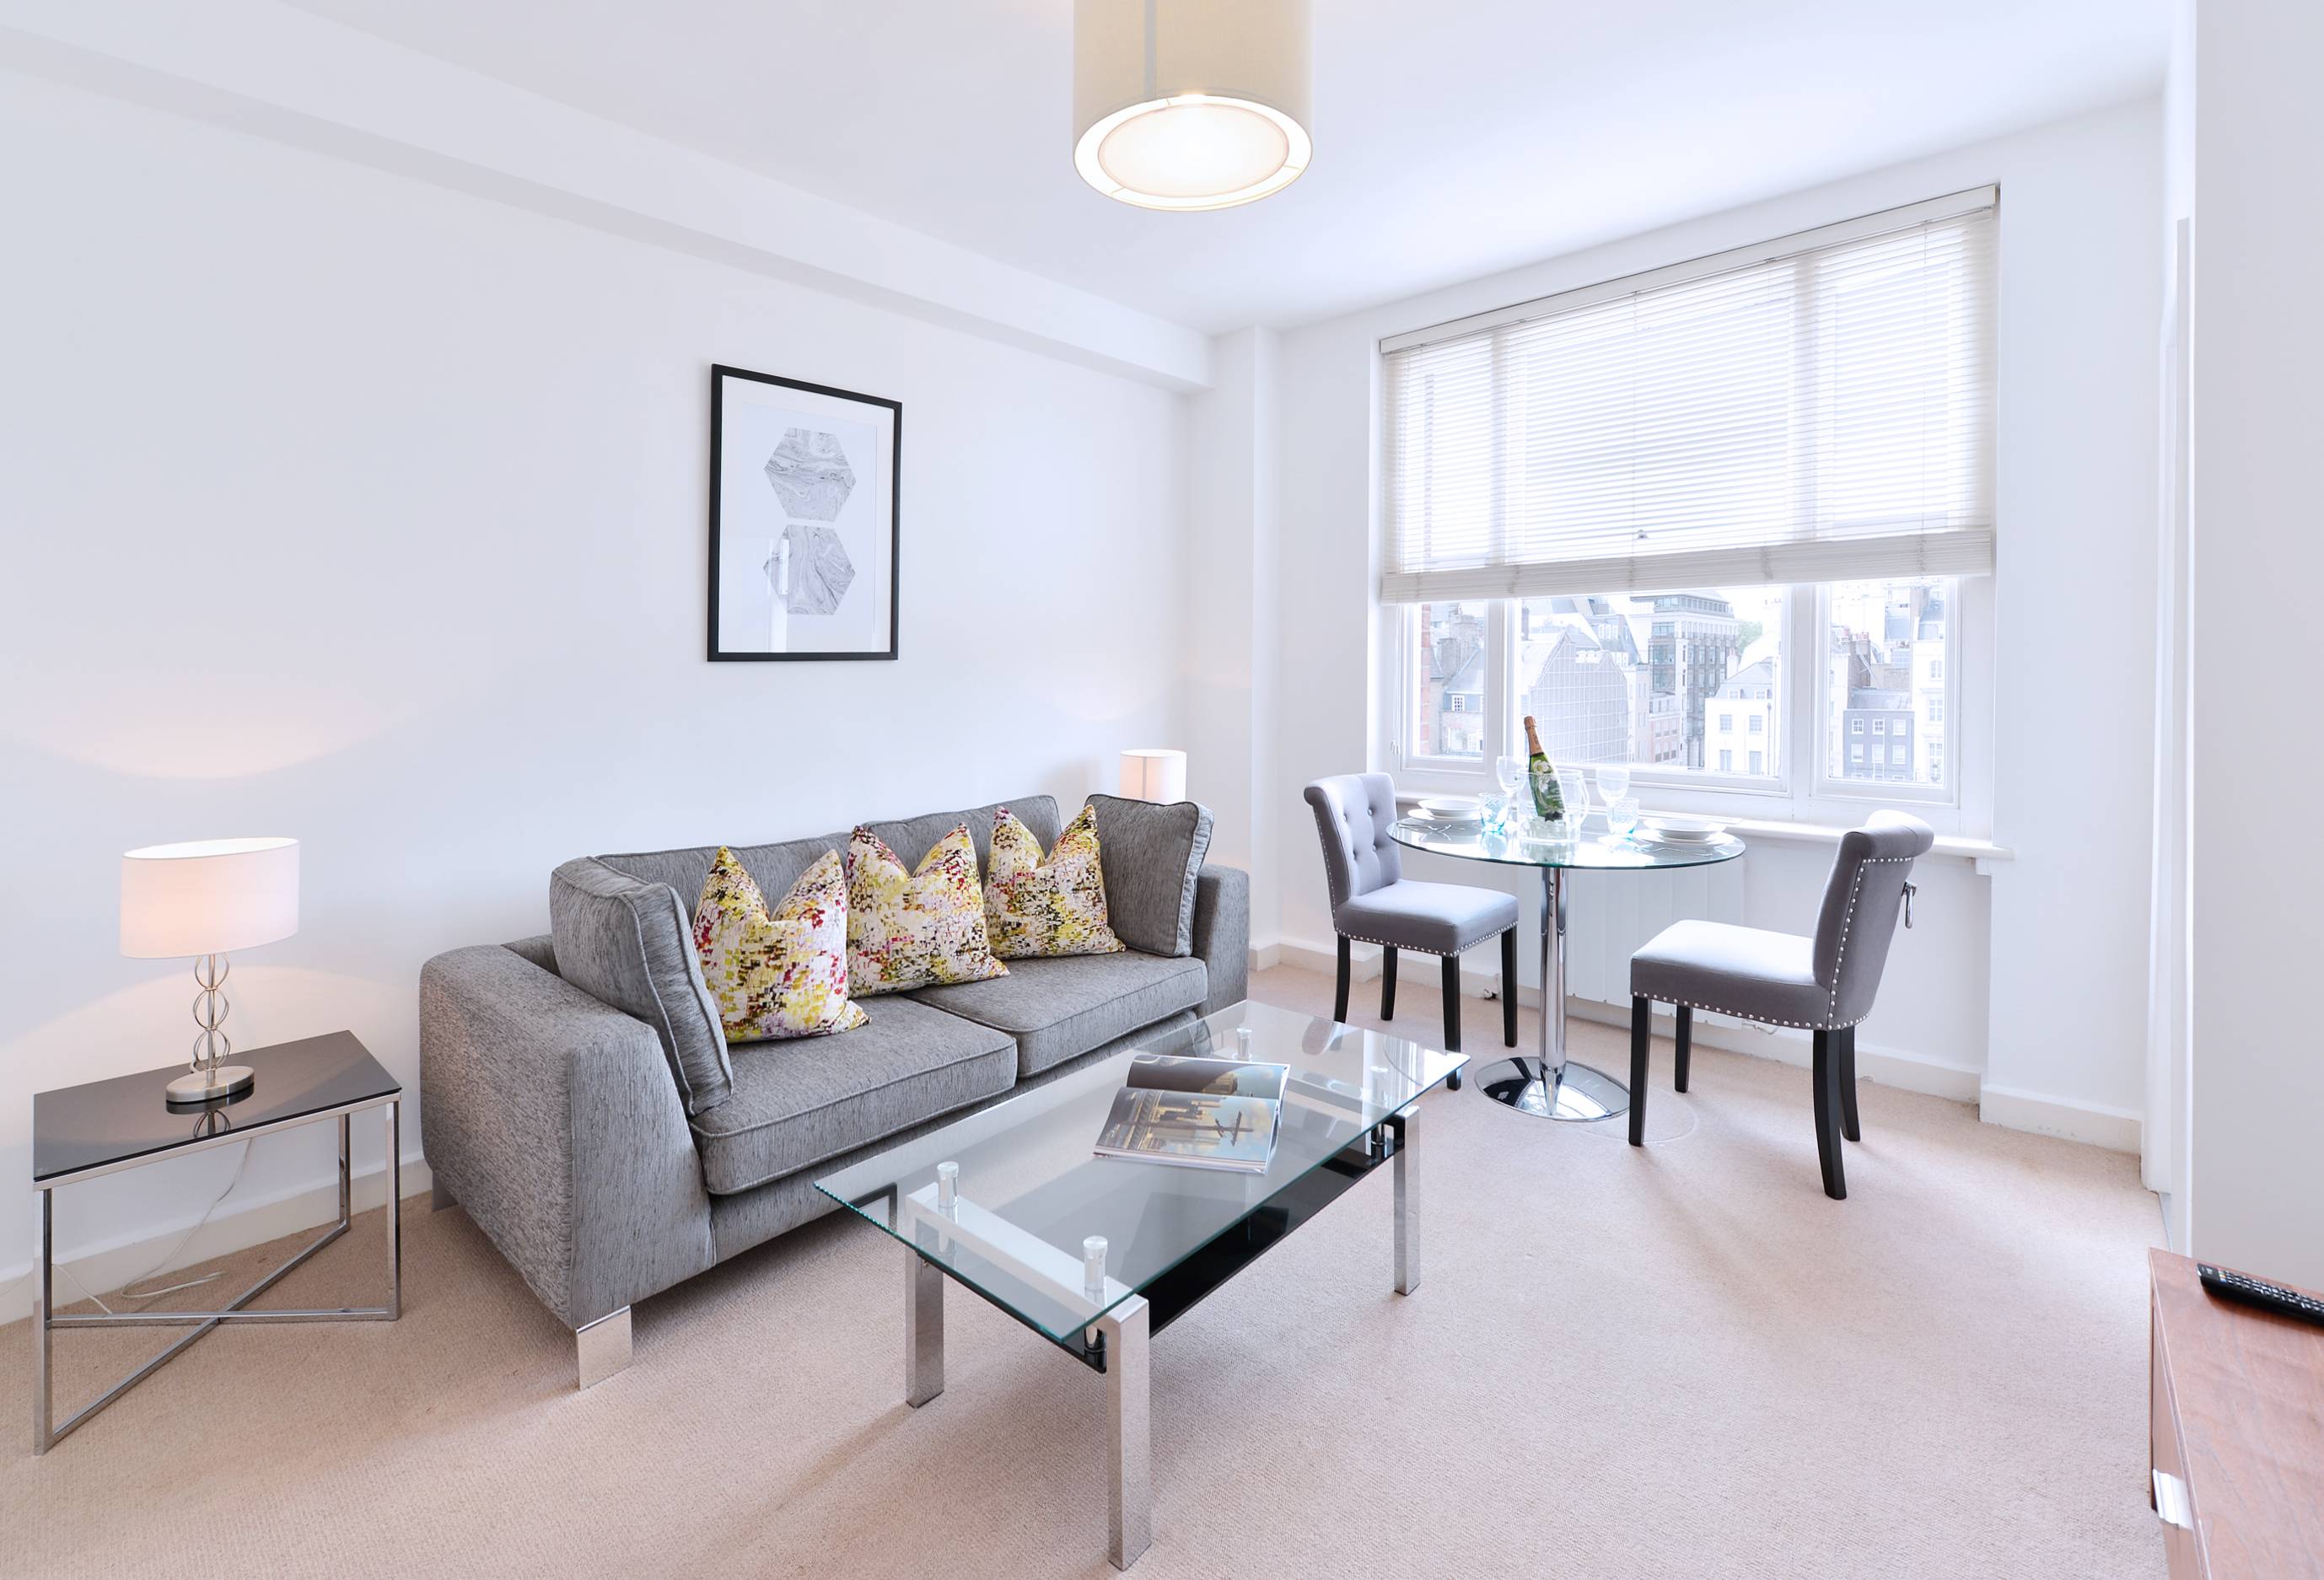 Stunning one bedroom apartment is situated on the six floor of this beautiful red brick building in the heart of Mayfair.